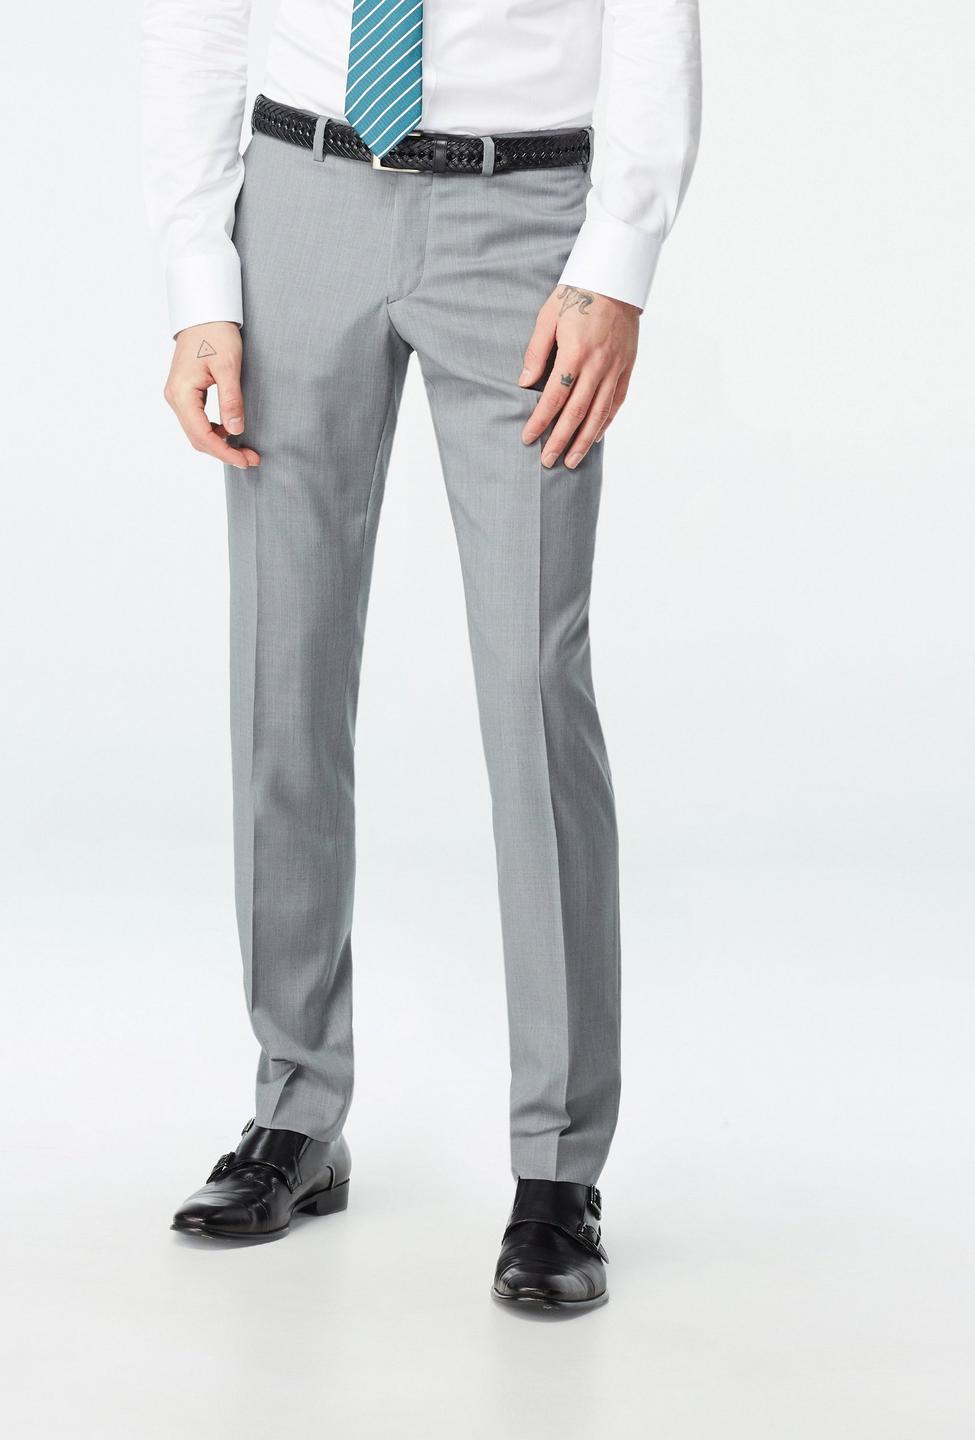 Gray pants - Hemsworth Solid Design from Premium Indochino Collection